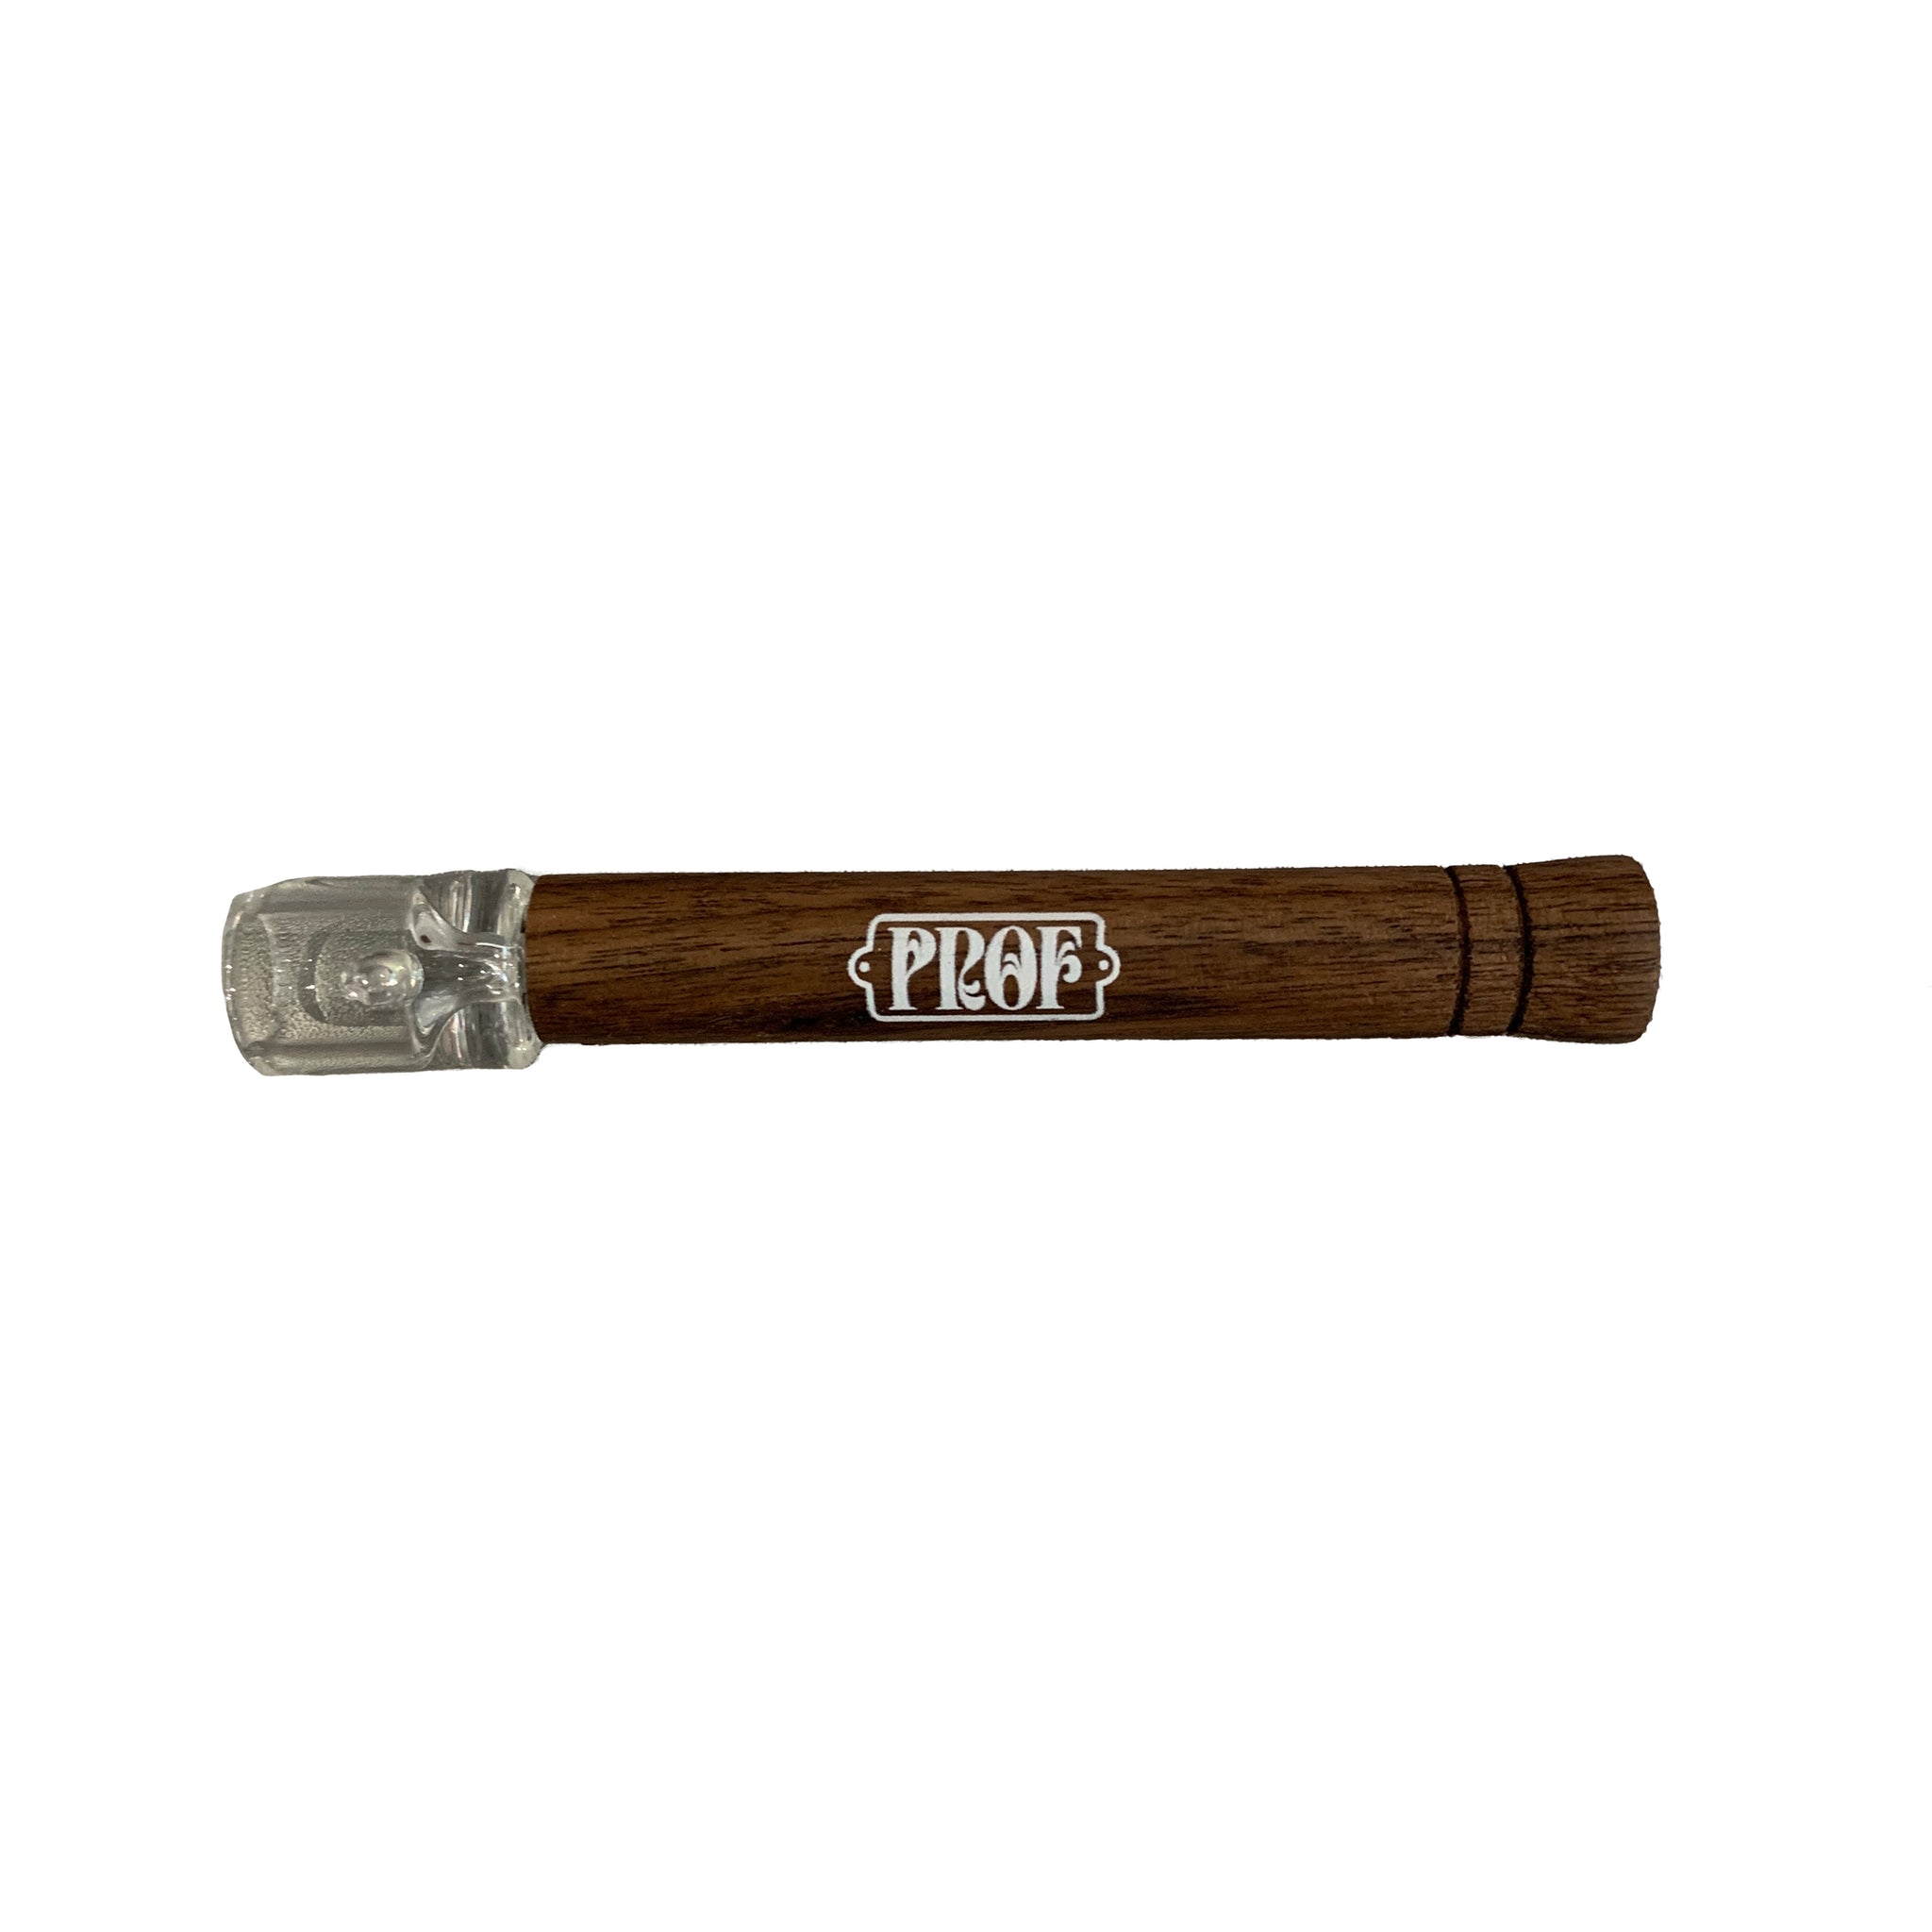 PROF "Nametag" Wooden Pipes